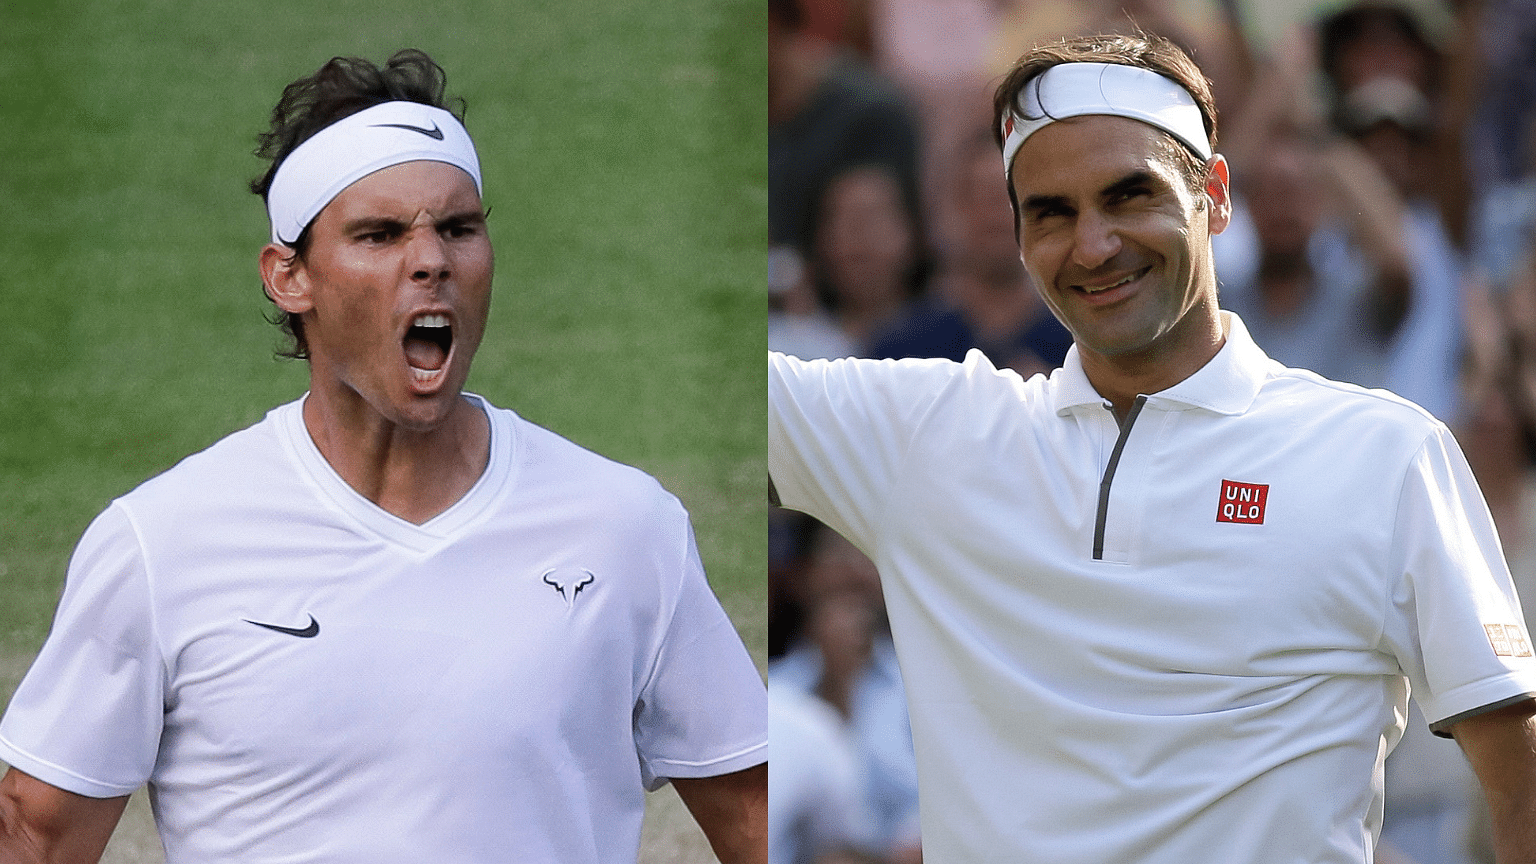 When Roger Federer and Rafael Nadal meet in the Wimbledon semifinals, it’ll be their first matchup at the All England Club since their memorable 2008 final.